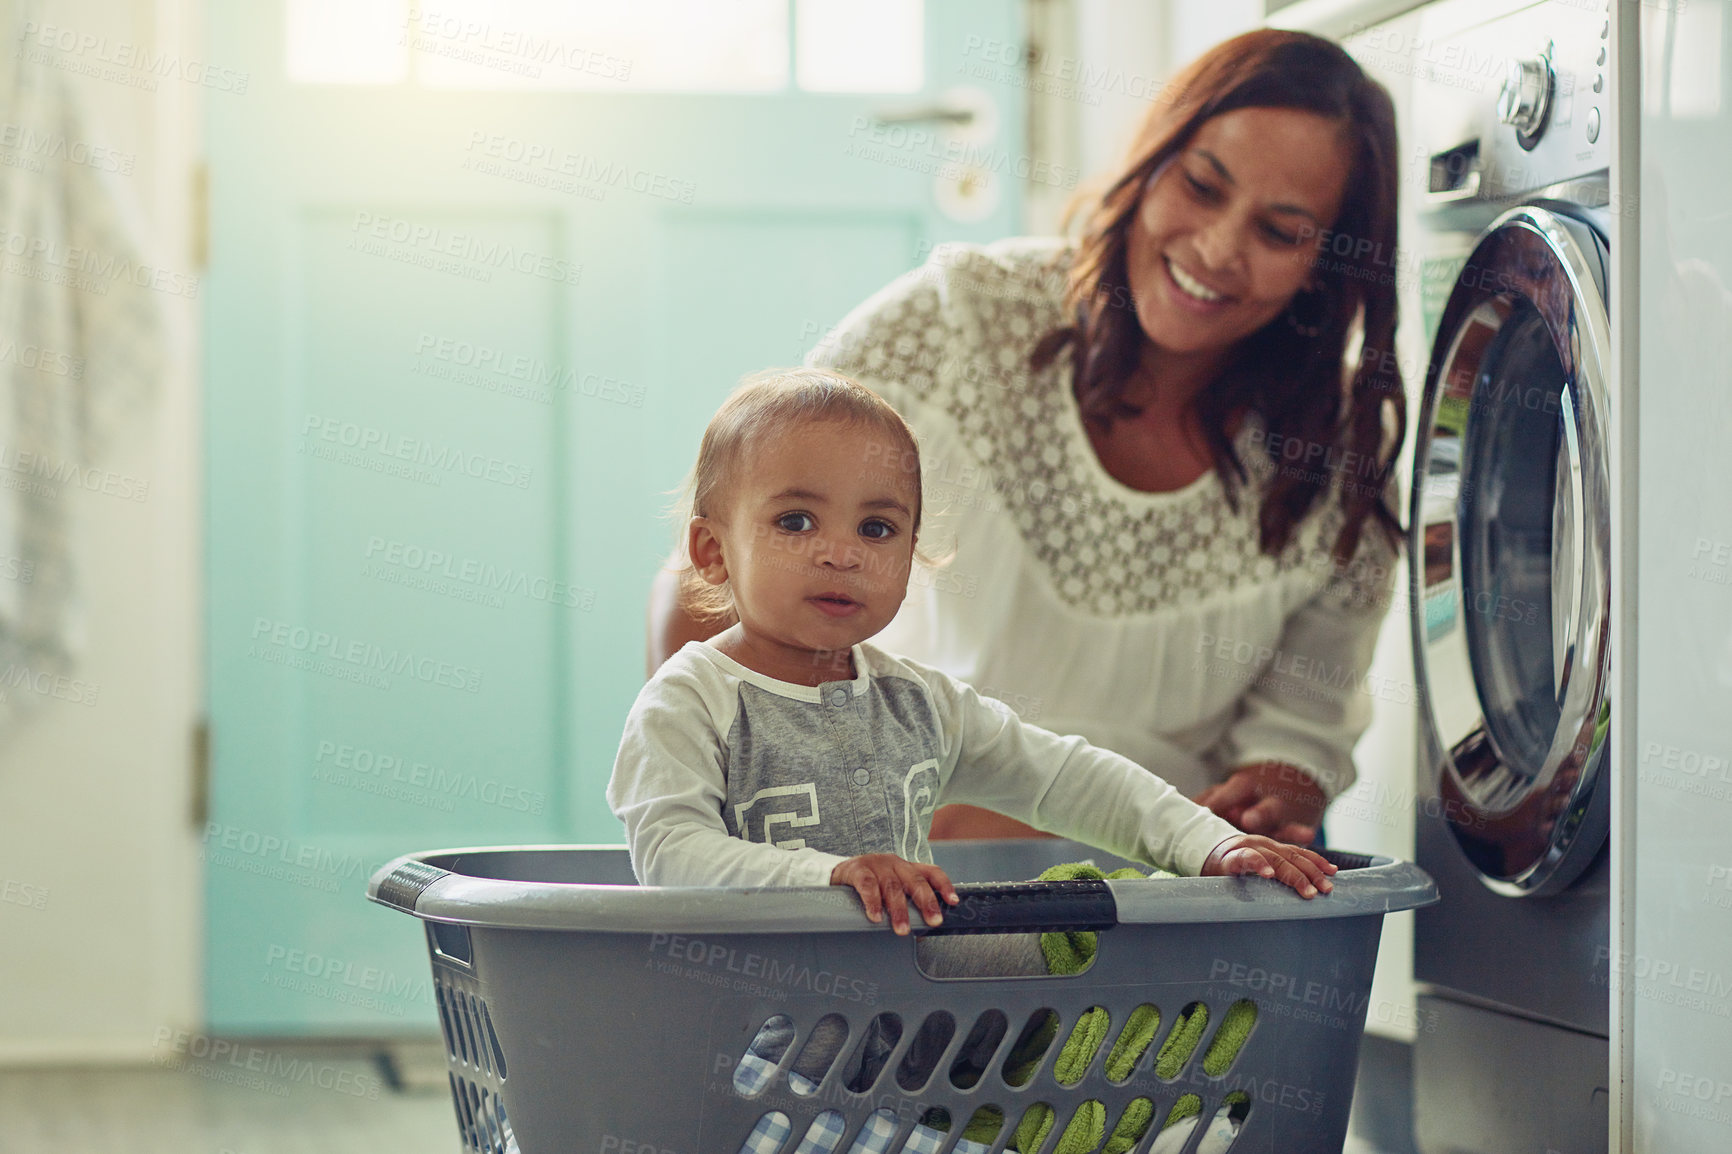 Buy stock photo Shot of a mother and her adorable baby boy doing the laundry at home